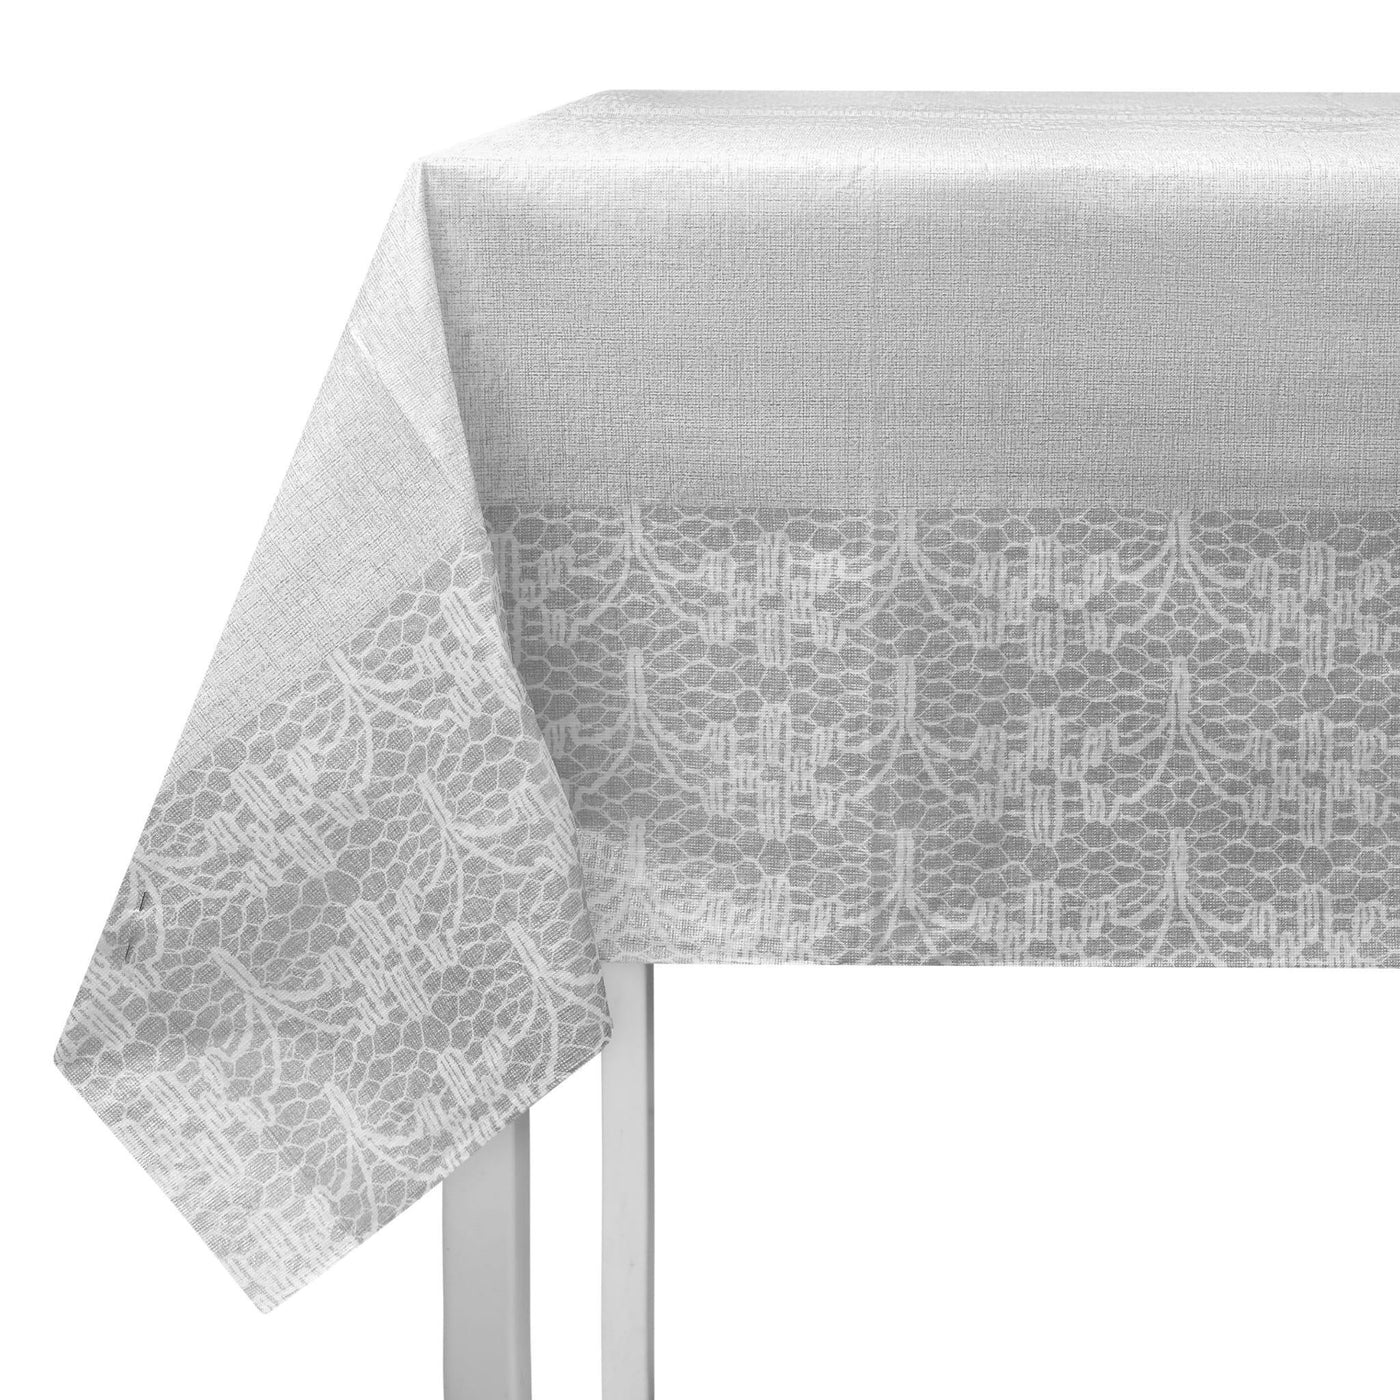 54"x108" White & Silver Plastic Print Tablecloth (1 Count)